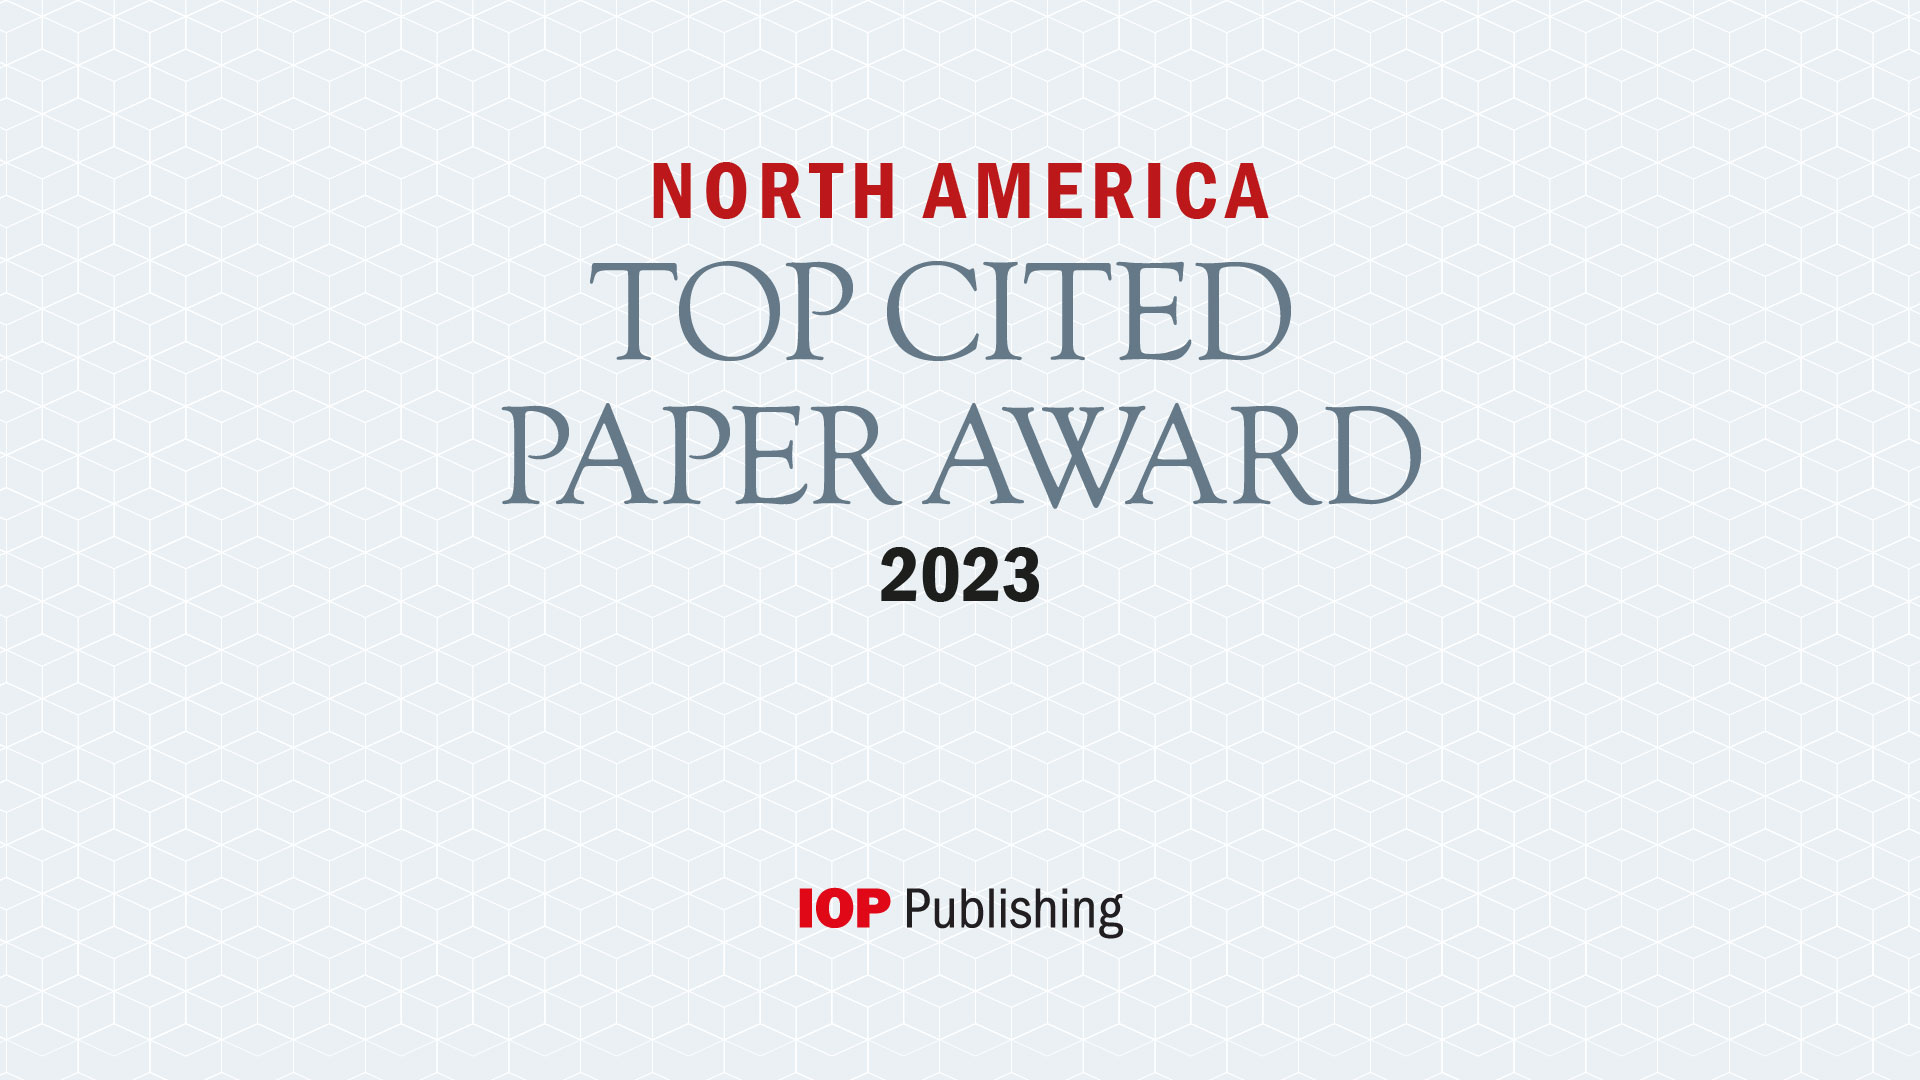 IOP Publishing's North American Top Cited Paper Awards